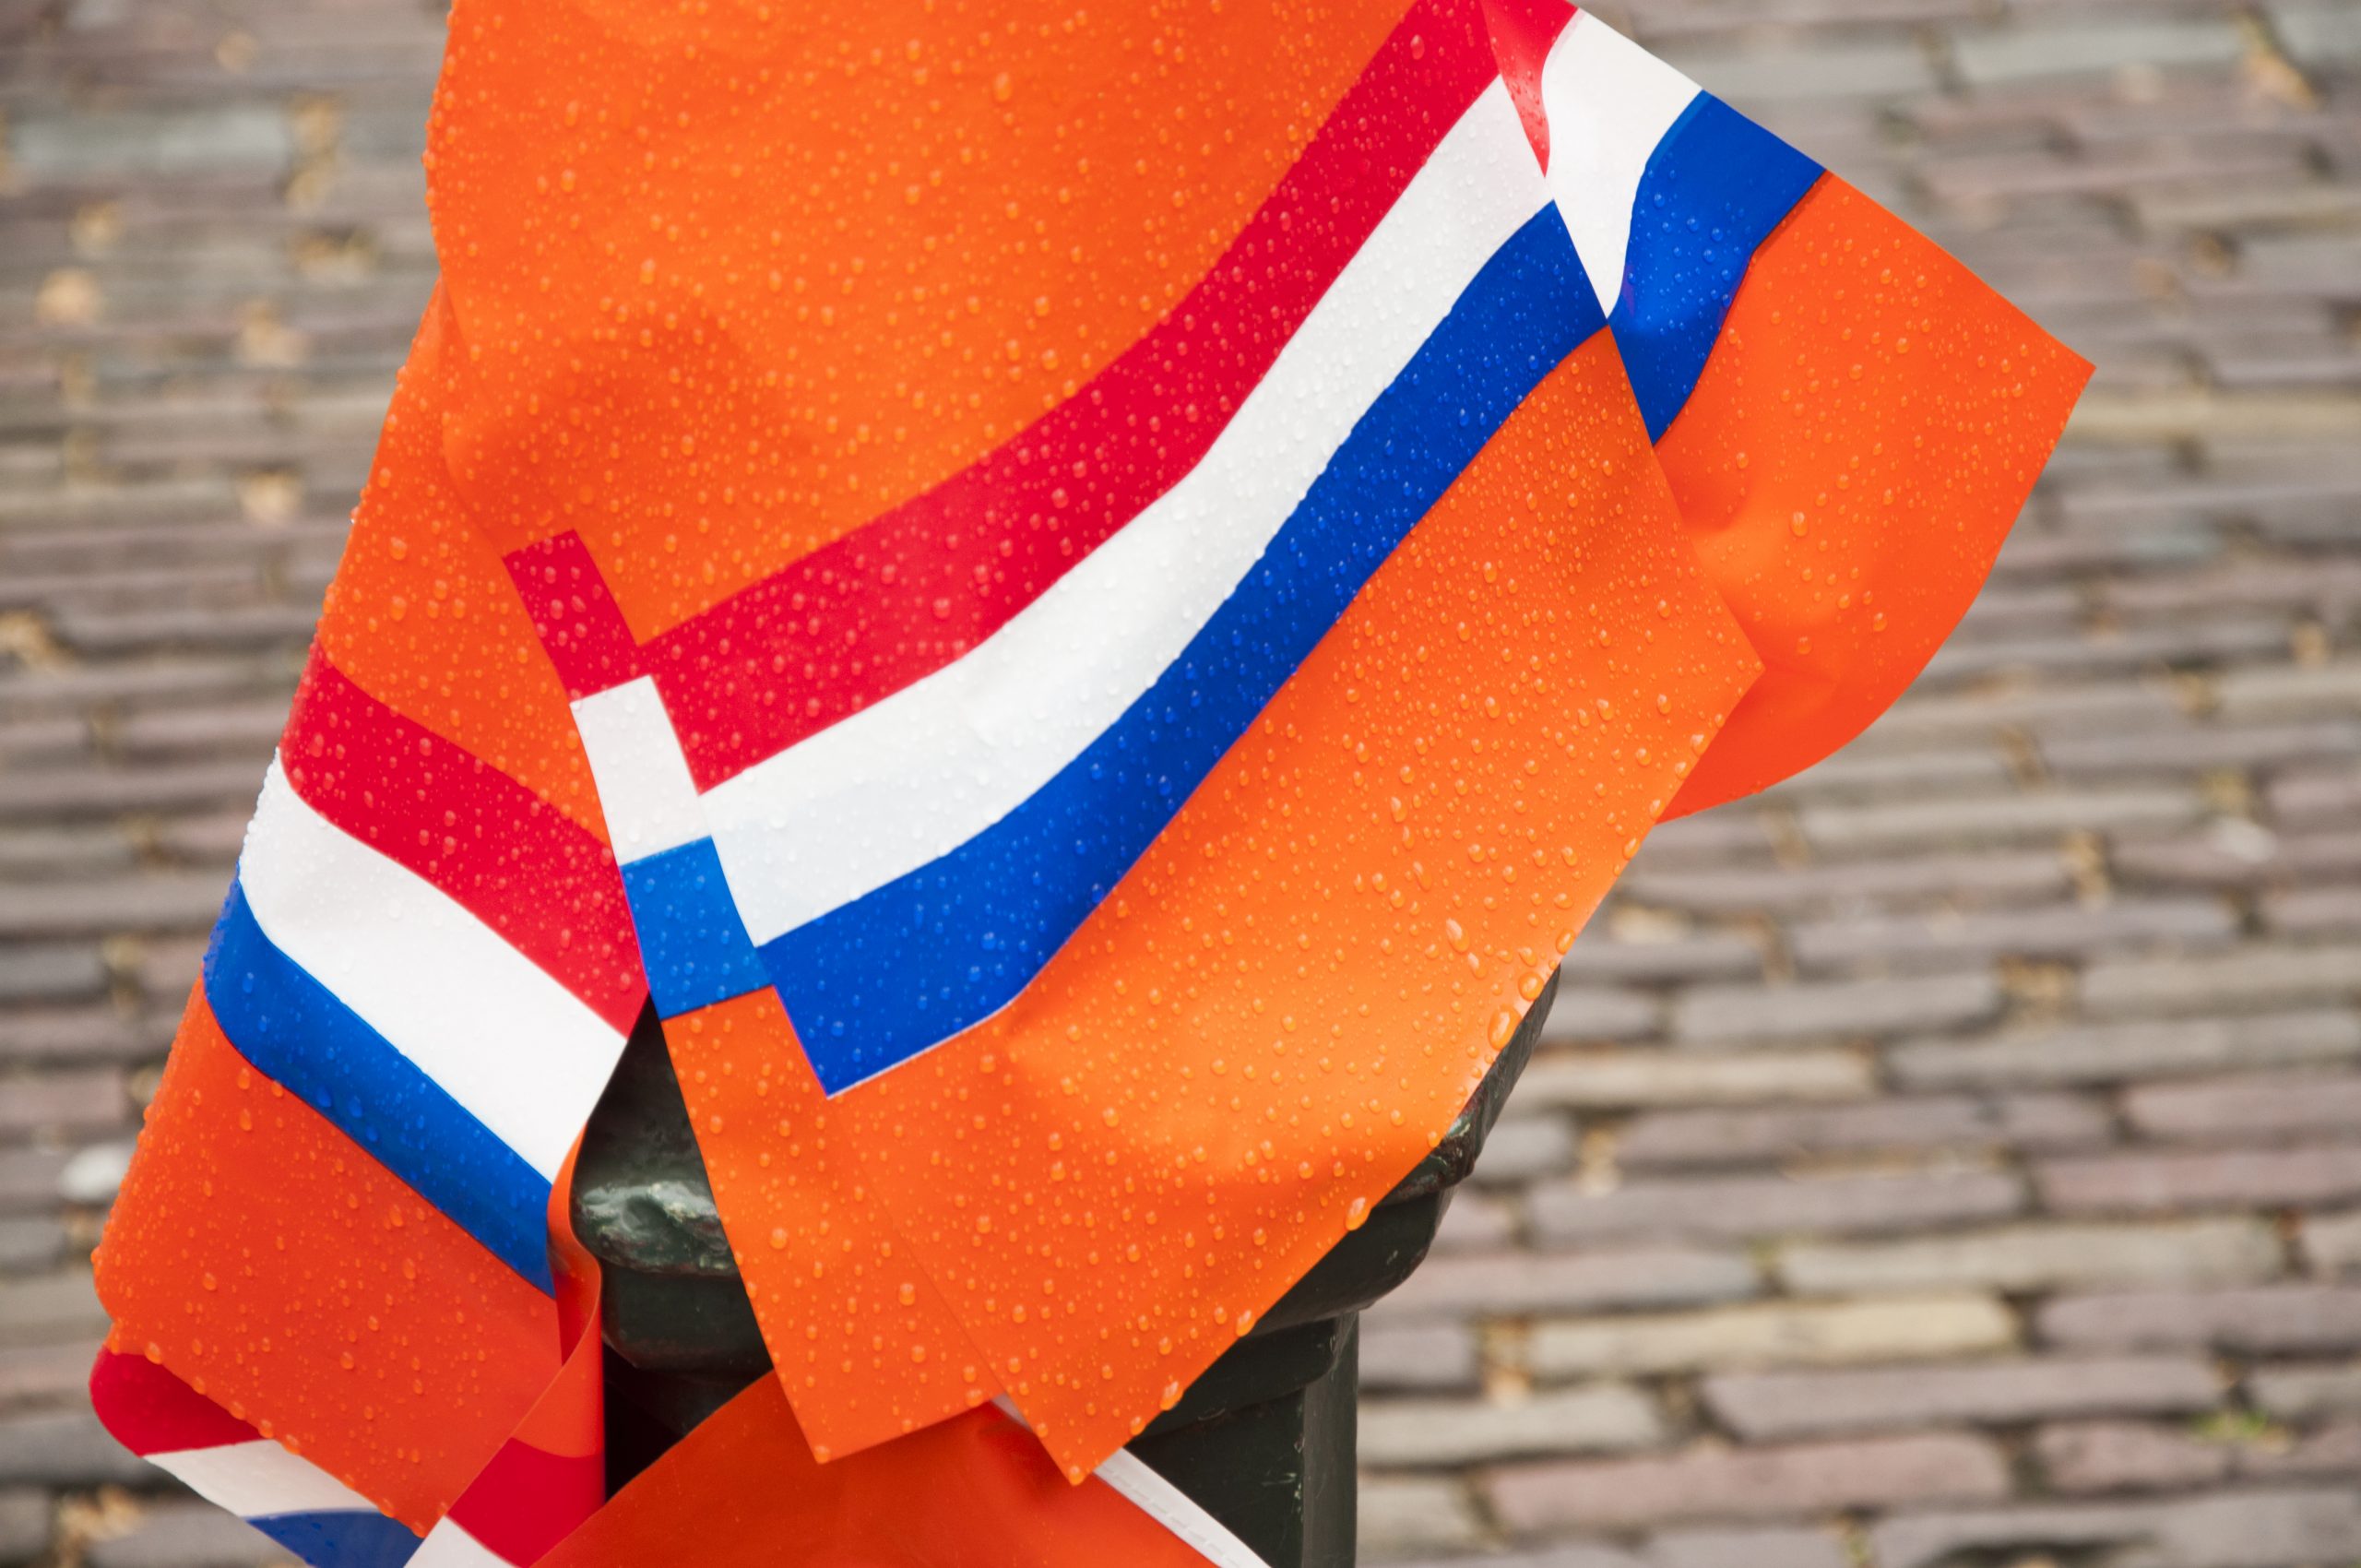 Ribbon rain and King's Day will be Residential Day this year